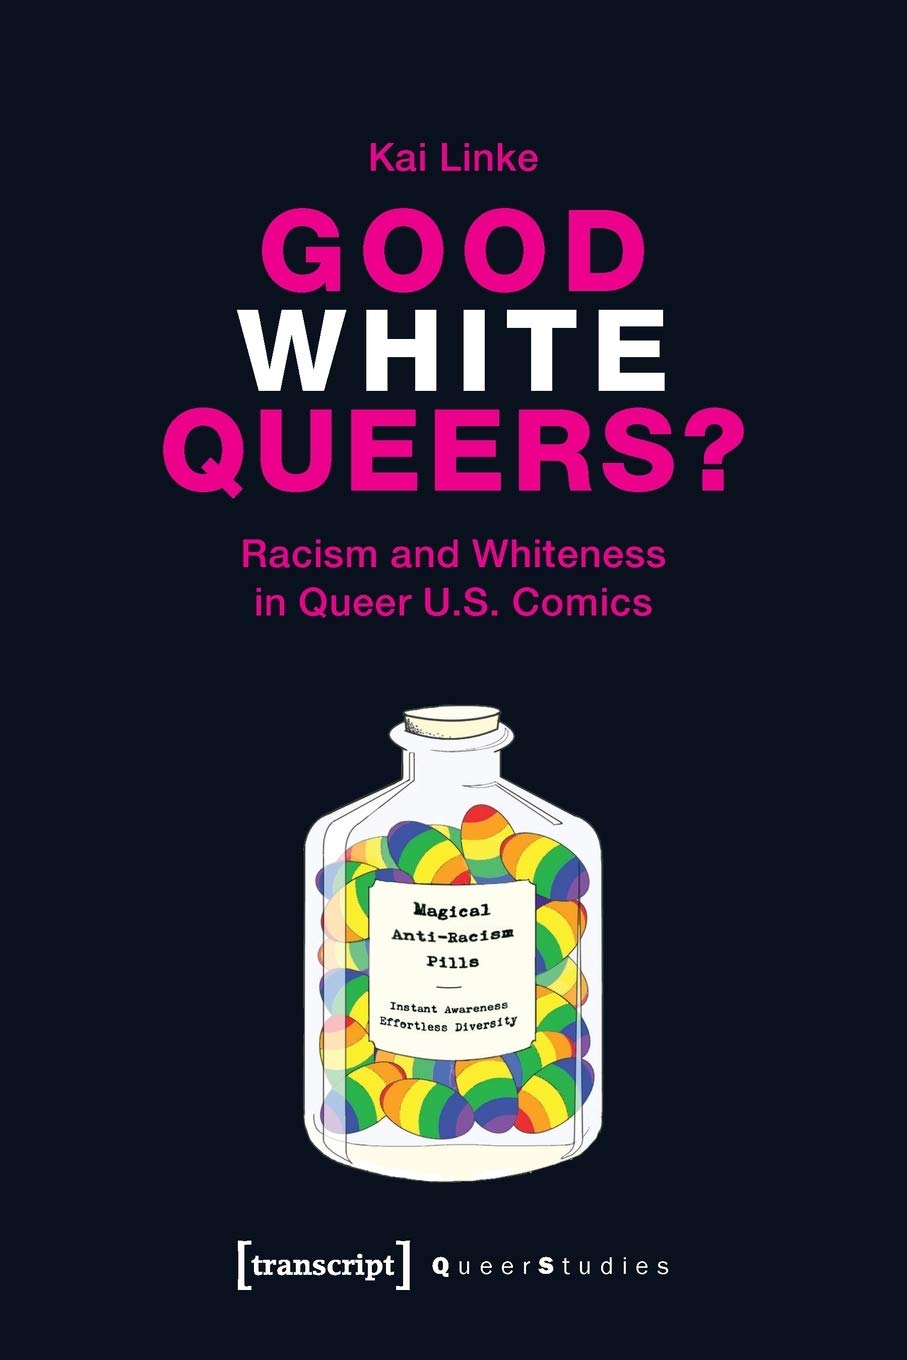 Good white queers?